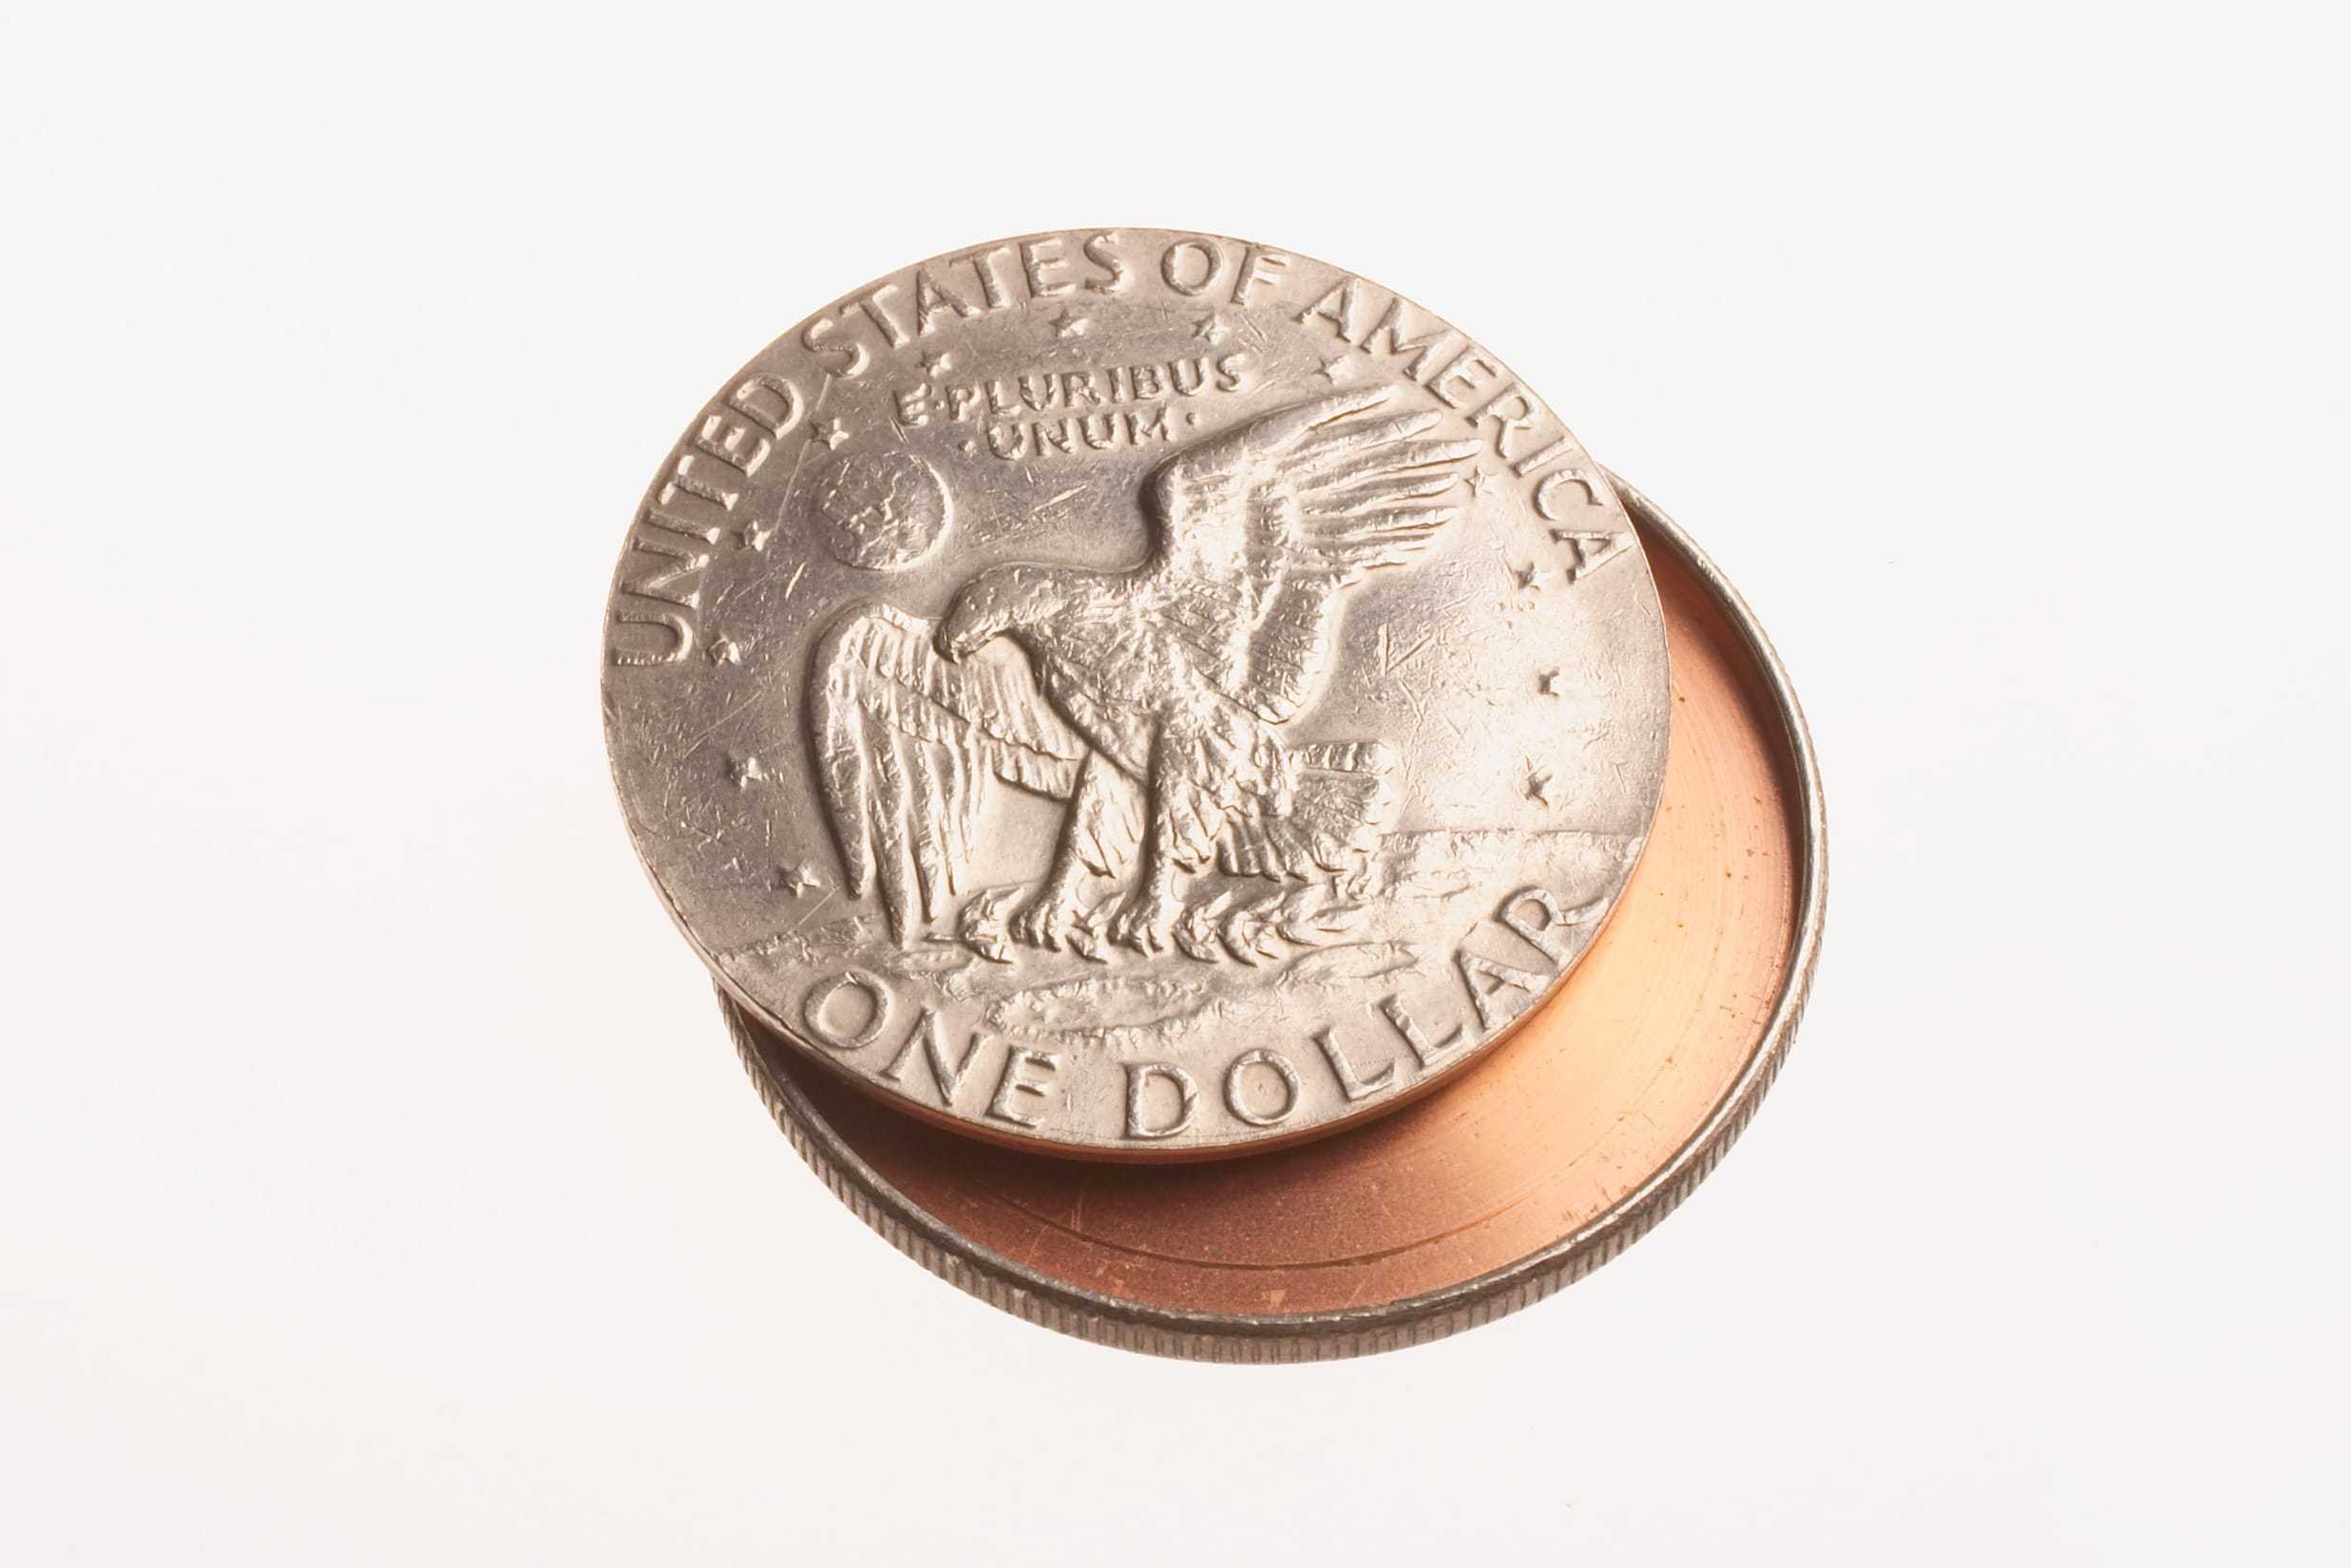 A hollow container disguised as an Eisenhower silver dollar that can conceal messages or film